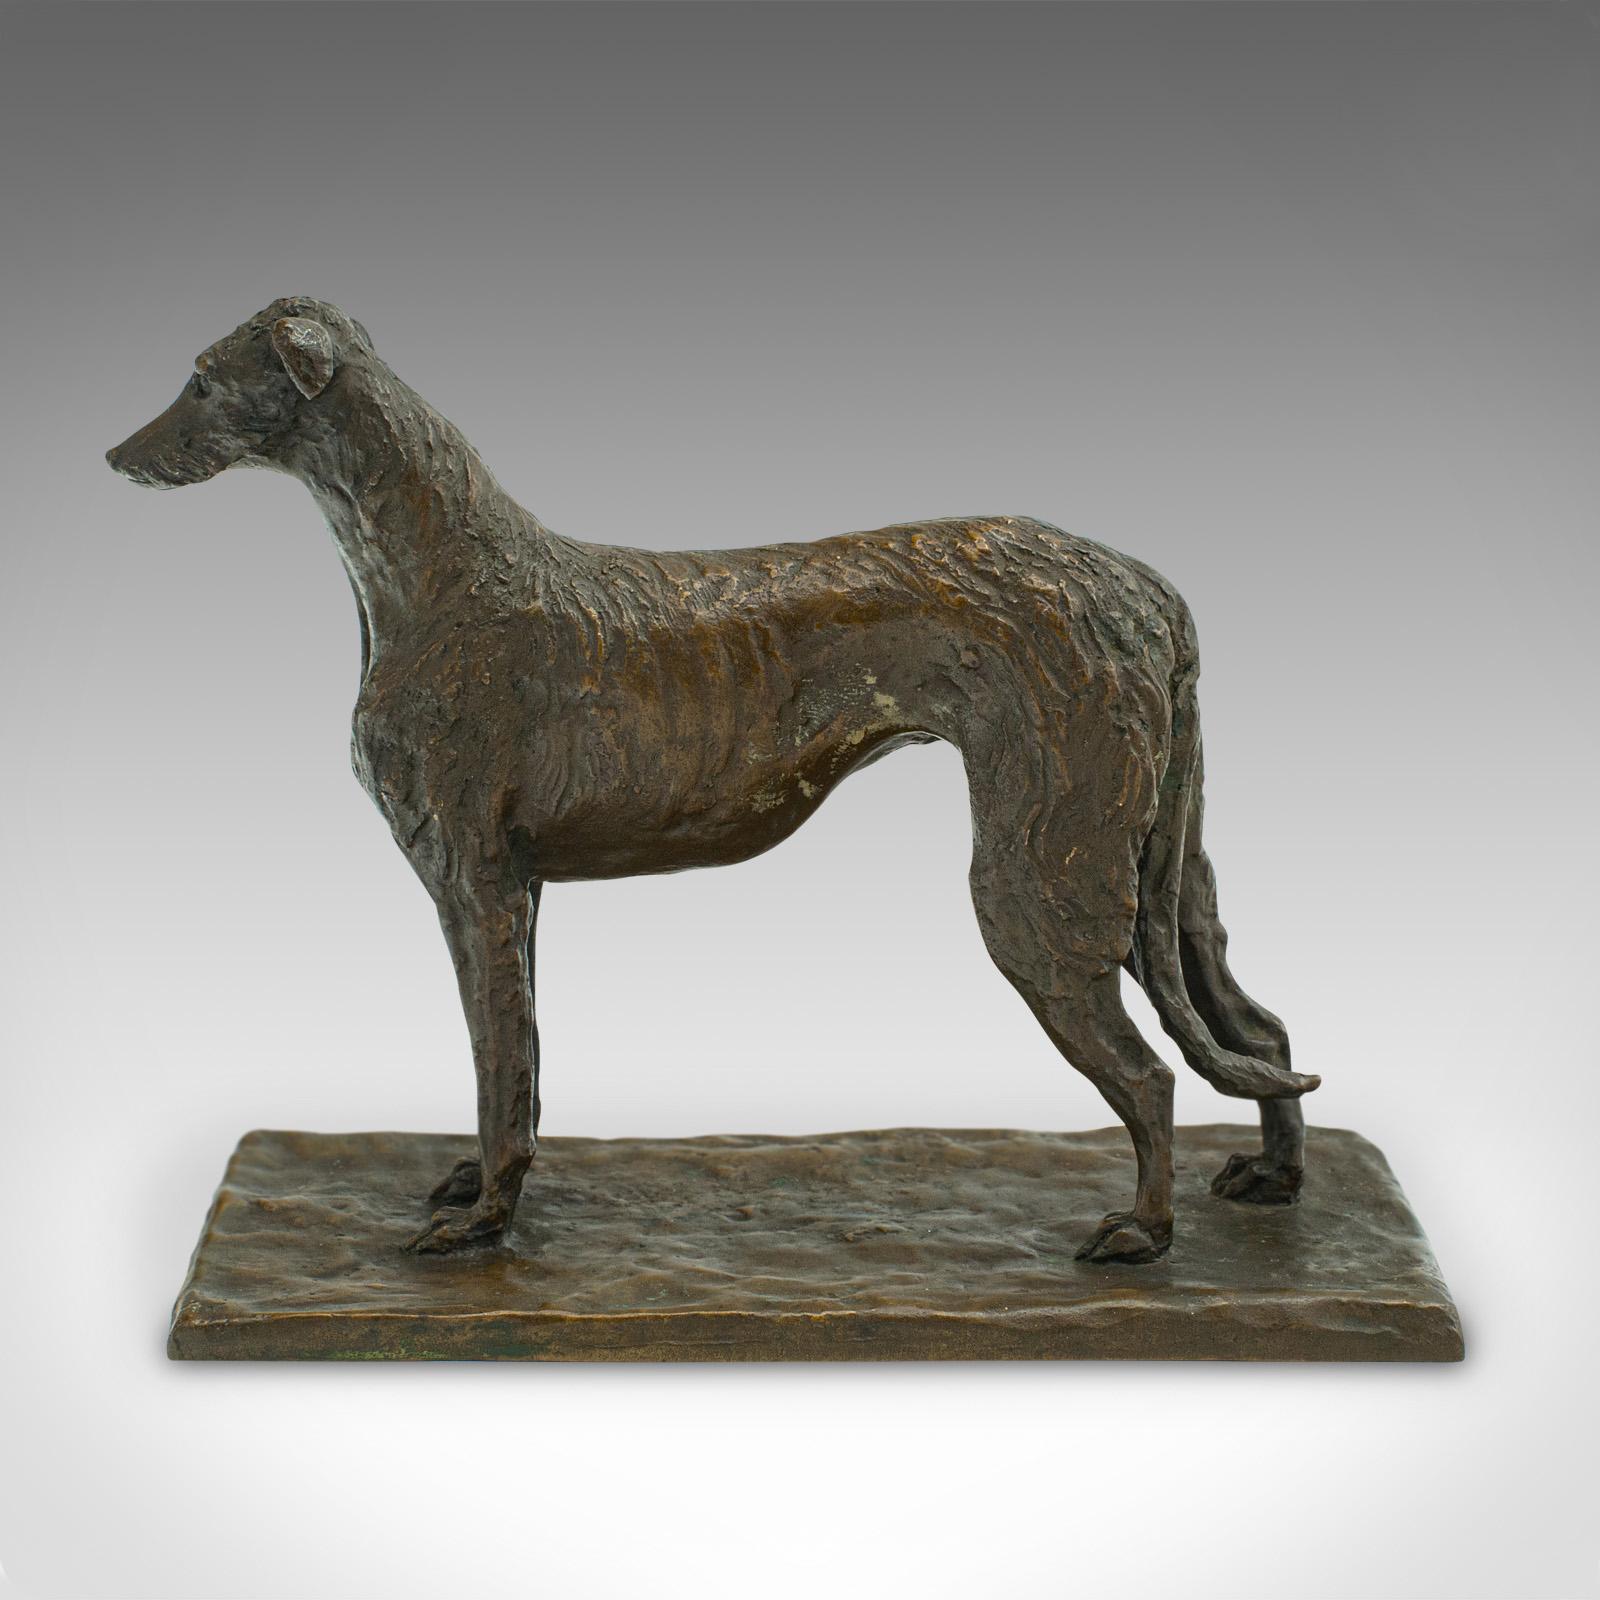 This is an antique decorative dog figure. An Austrian, bronze Viennese Borzoi hound, dating to the late Victorian period, circa 1900.

Tactile and endearing, a treat for the display case or mantle
Displaying a desirable aged patina in good original